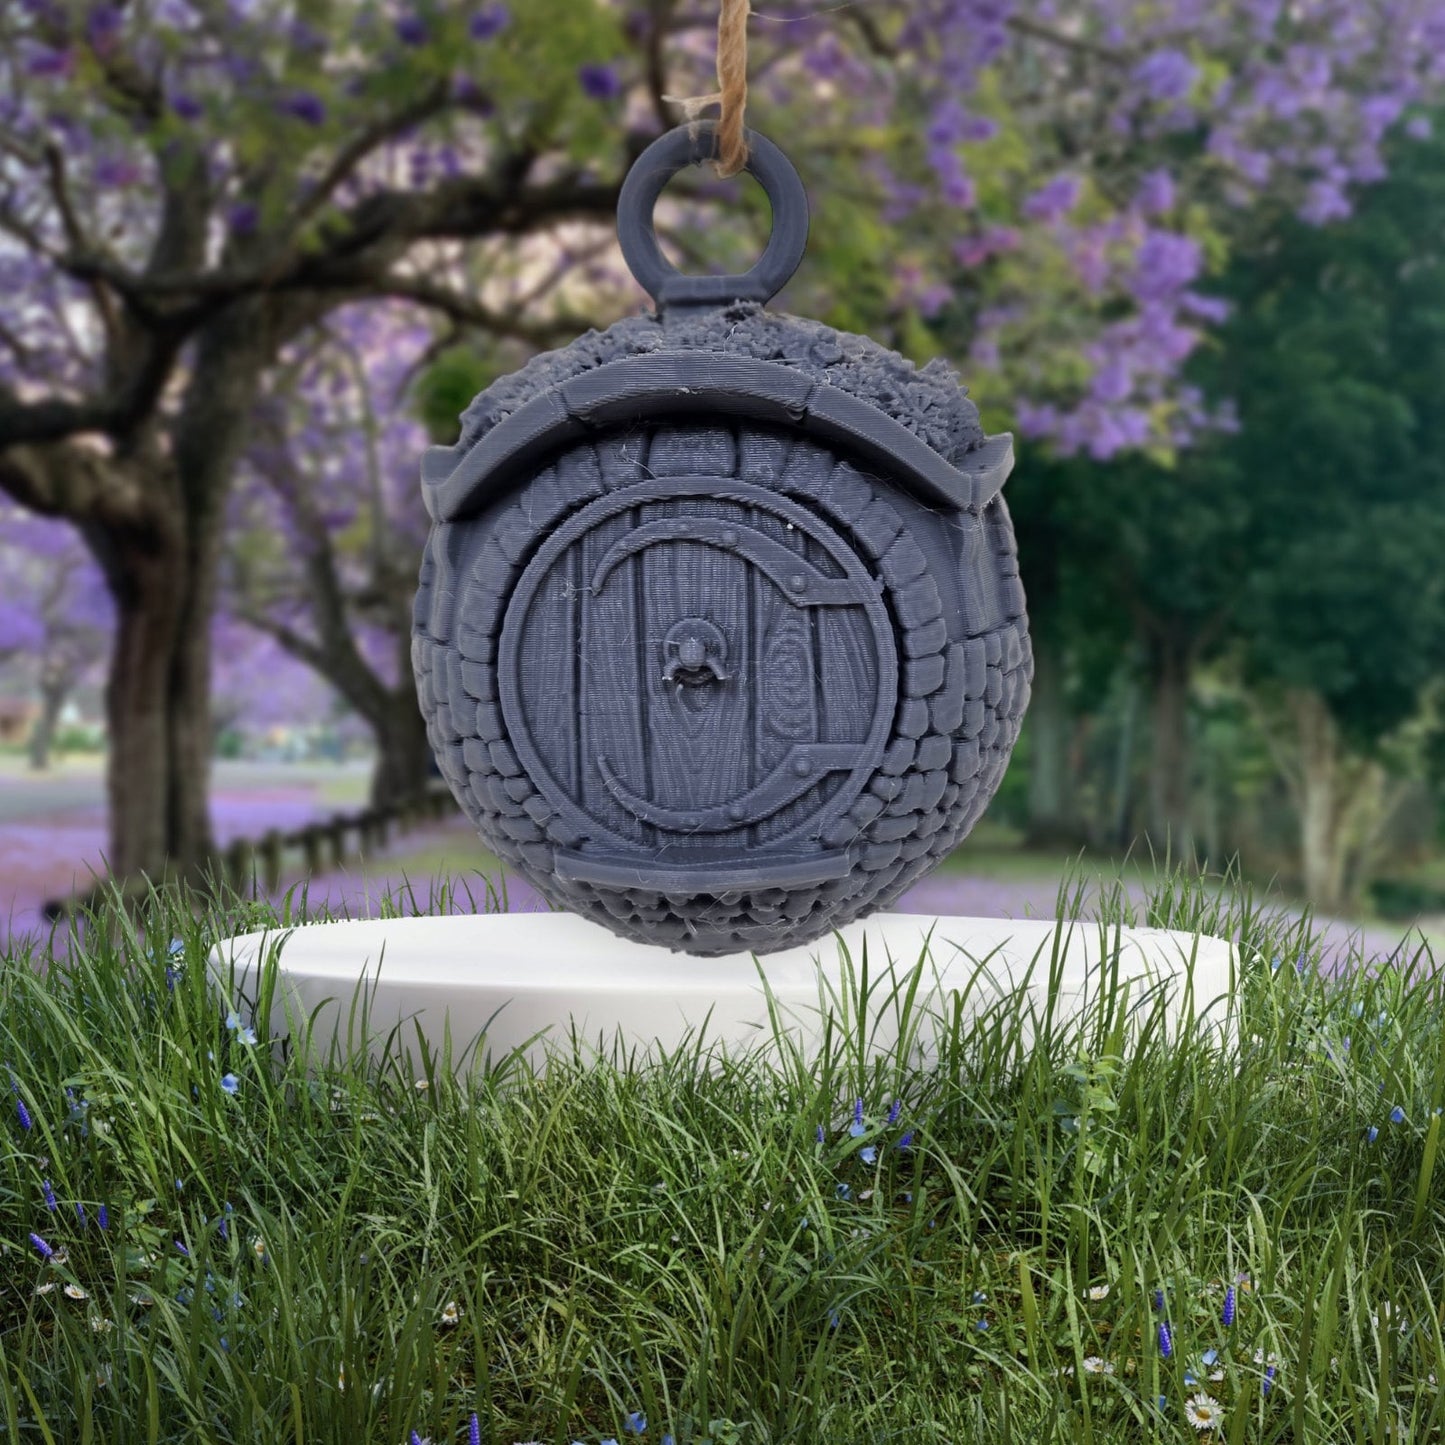 3D Printed Shire Hobbit Hole Christmas Ornament - Whimsical Holiday Decor